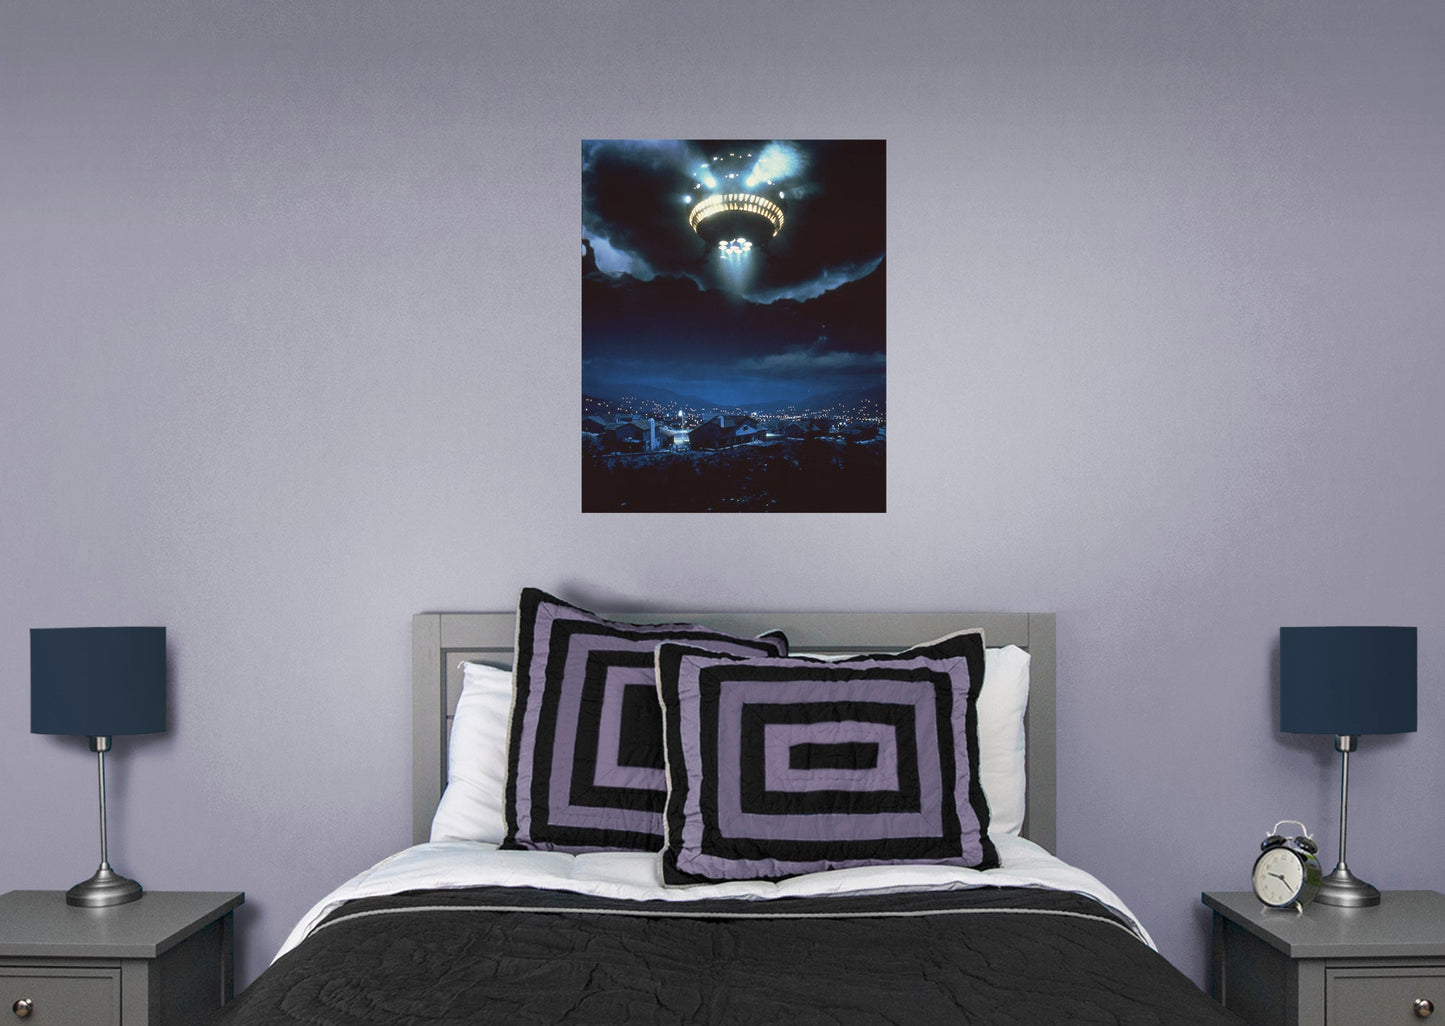 E.T.:  Spaceship Mural        - Officially Licensed NBC Universal Removable Wall   Adhesive Decal